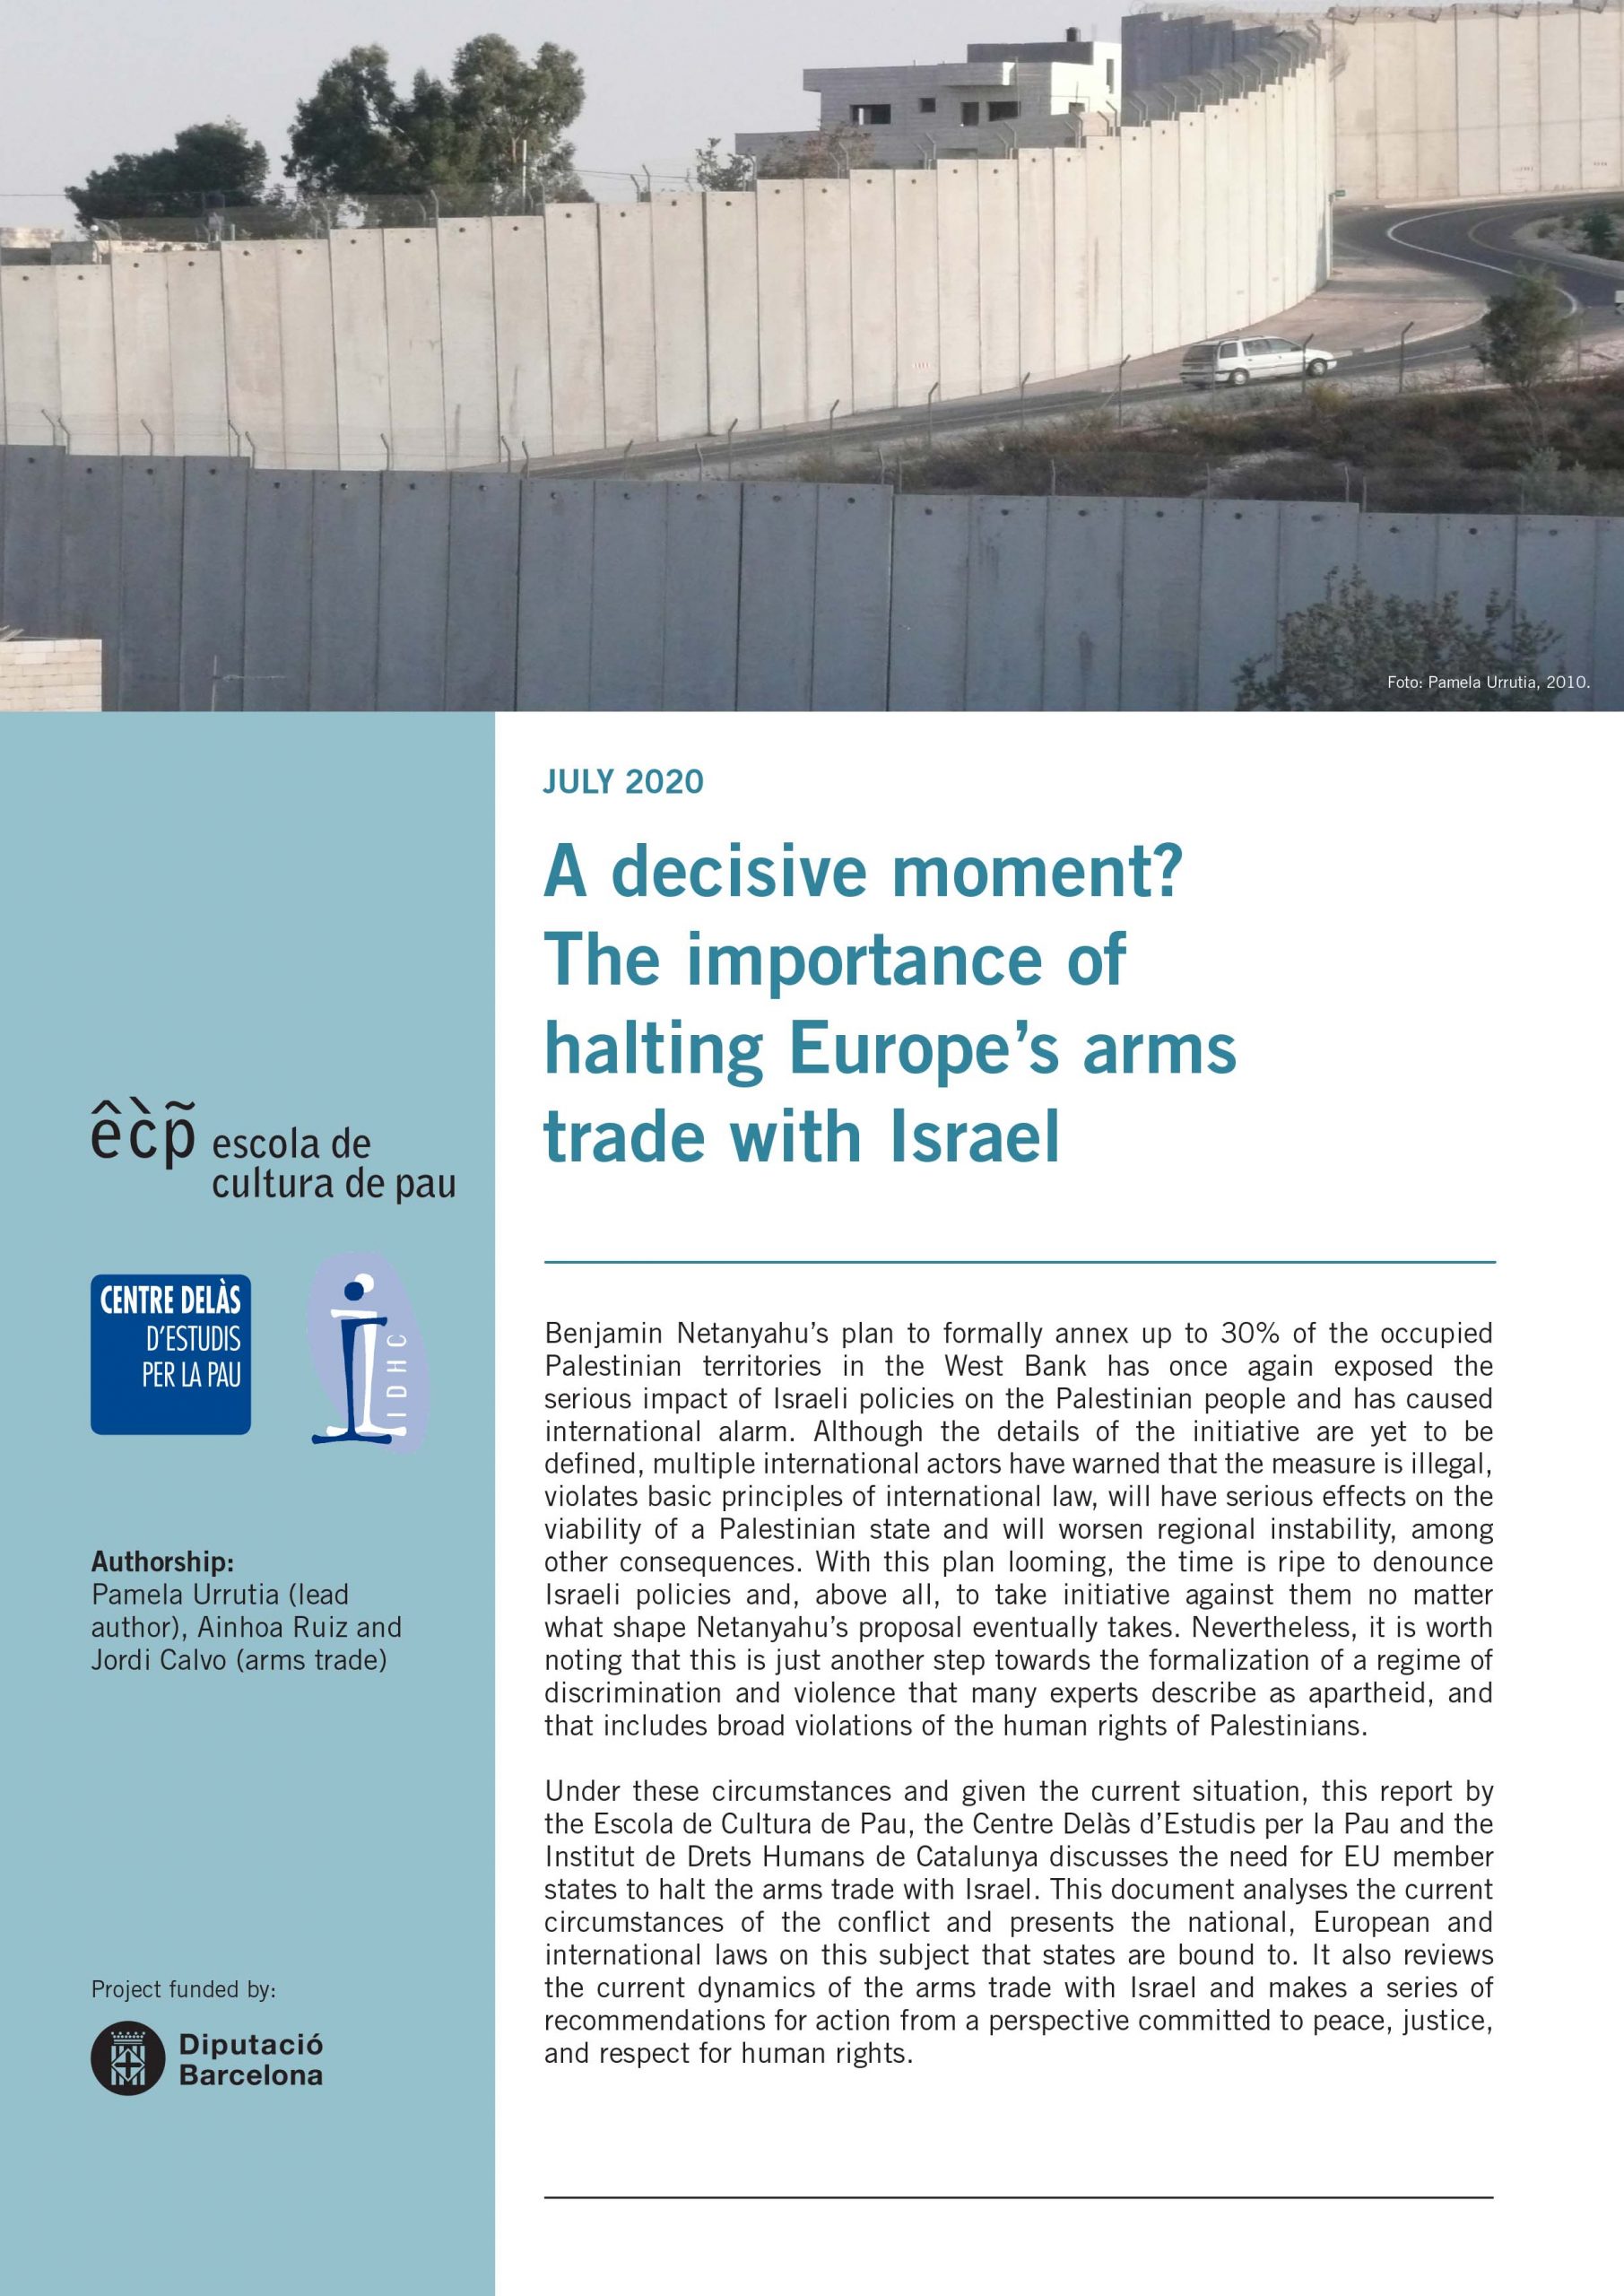 Policy Paper from ECP, IDHC and Centre Delàs: “A decisive moment? The importance of halting Europe’s arms trade with Israel”